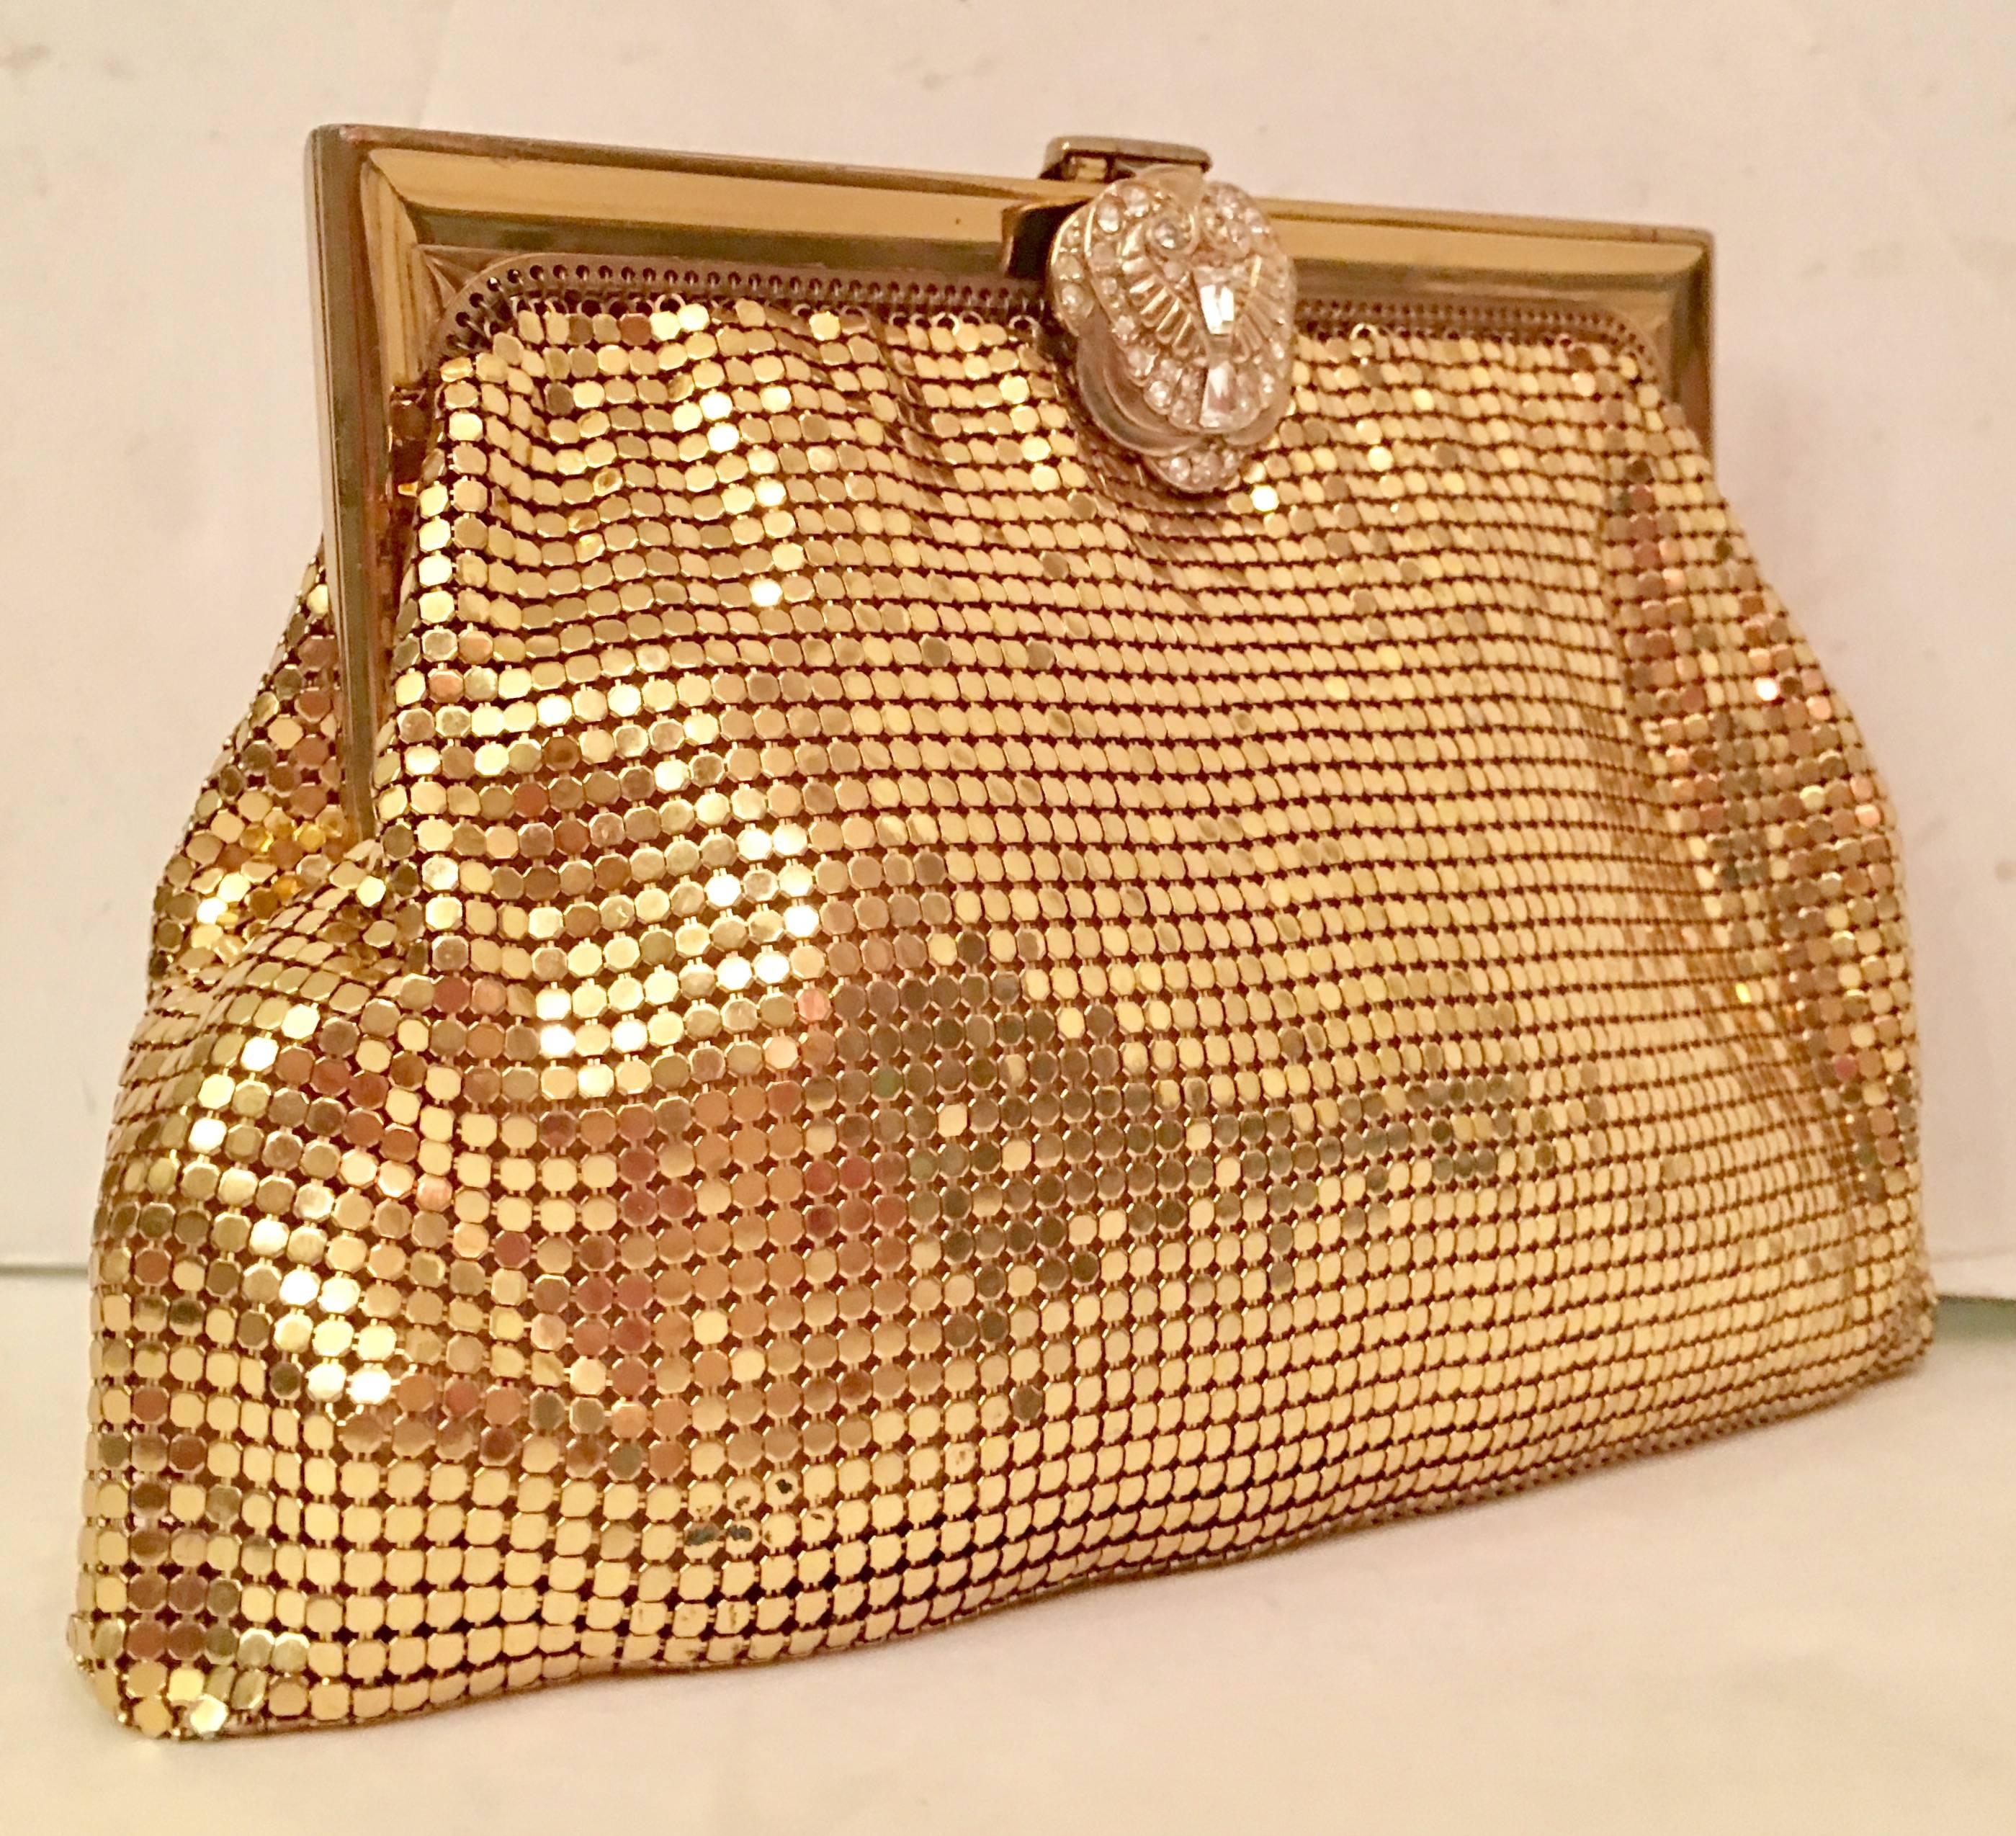 Vintage Art Deco style Whiting & Davis gold metal mesh clutch evening bag. Features a gold/brass plated metal mesh soft body and hard gold/brass plated metal frame and snap closure. The Art Deco style soft snap closure is adorned with clear